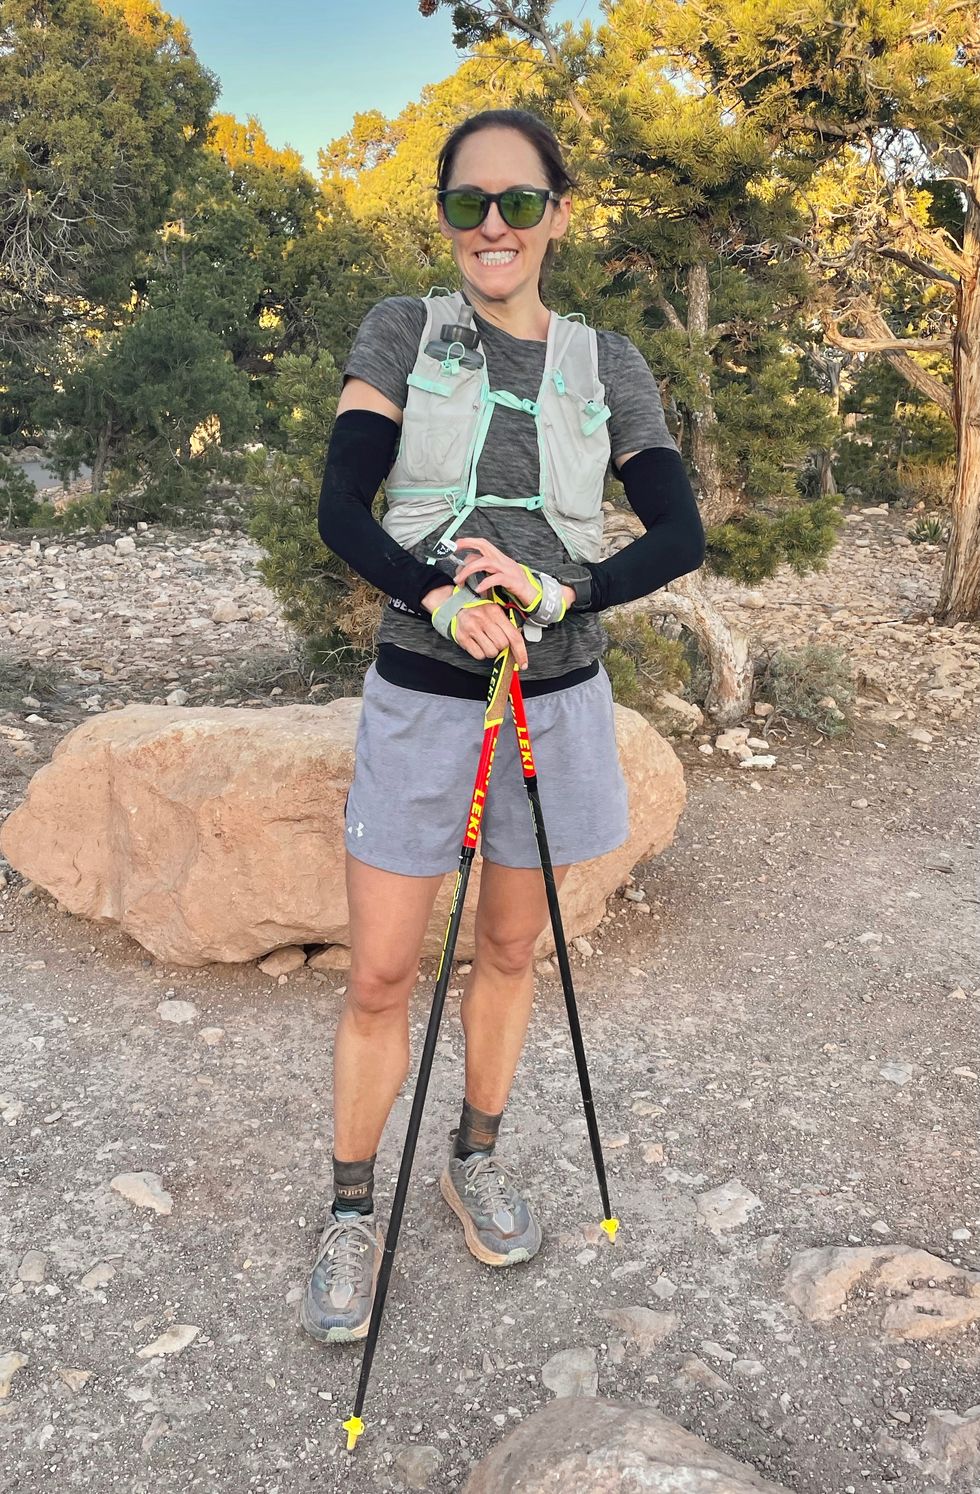 mallory Dare brooks in the grand canyon for the r2r2r2r2r fkt